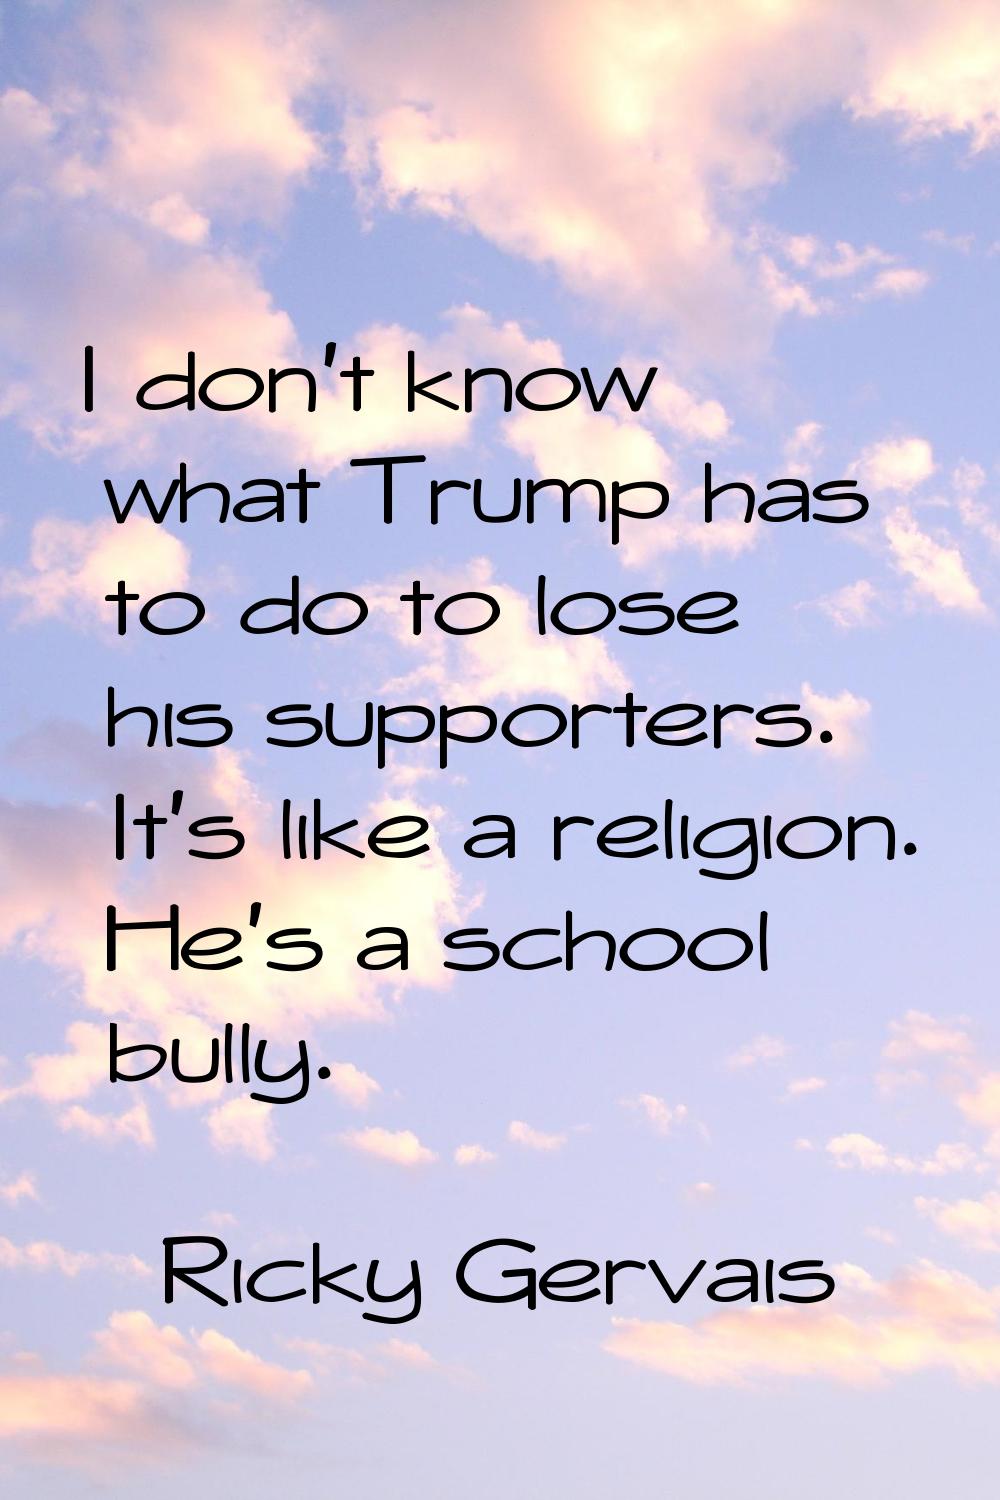 I don't know what Trump has to do to lose his supporters. It's like a religion. He's a school bully